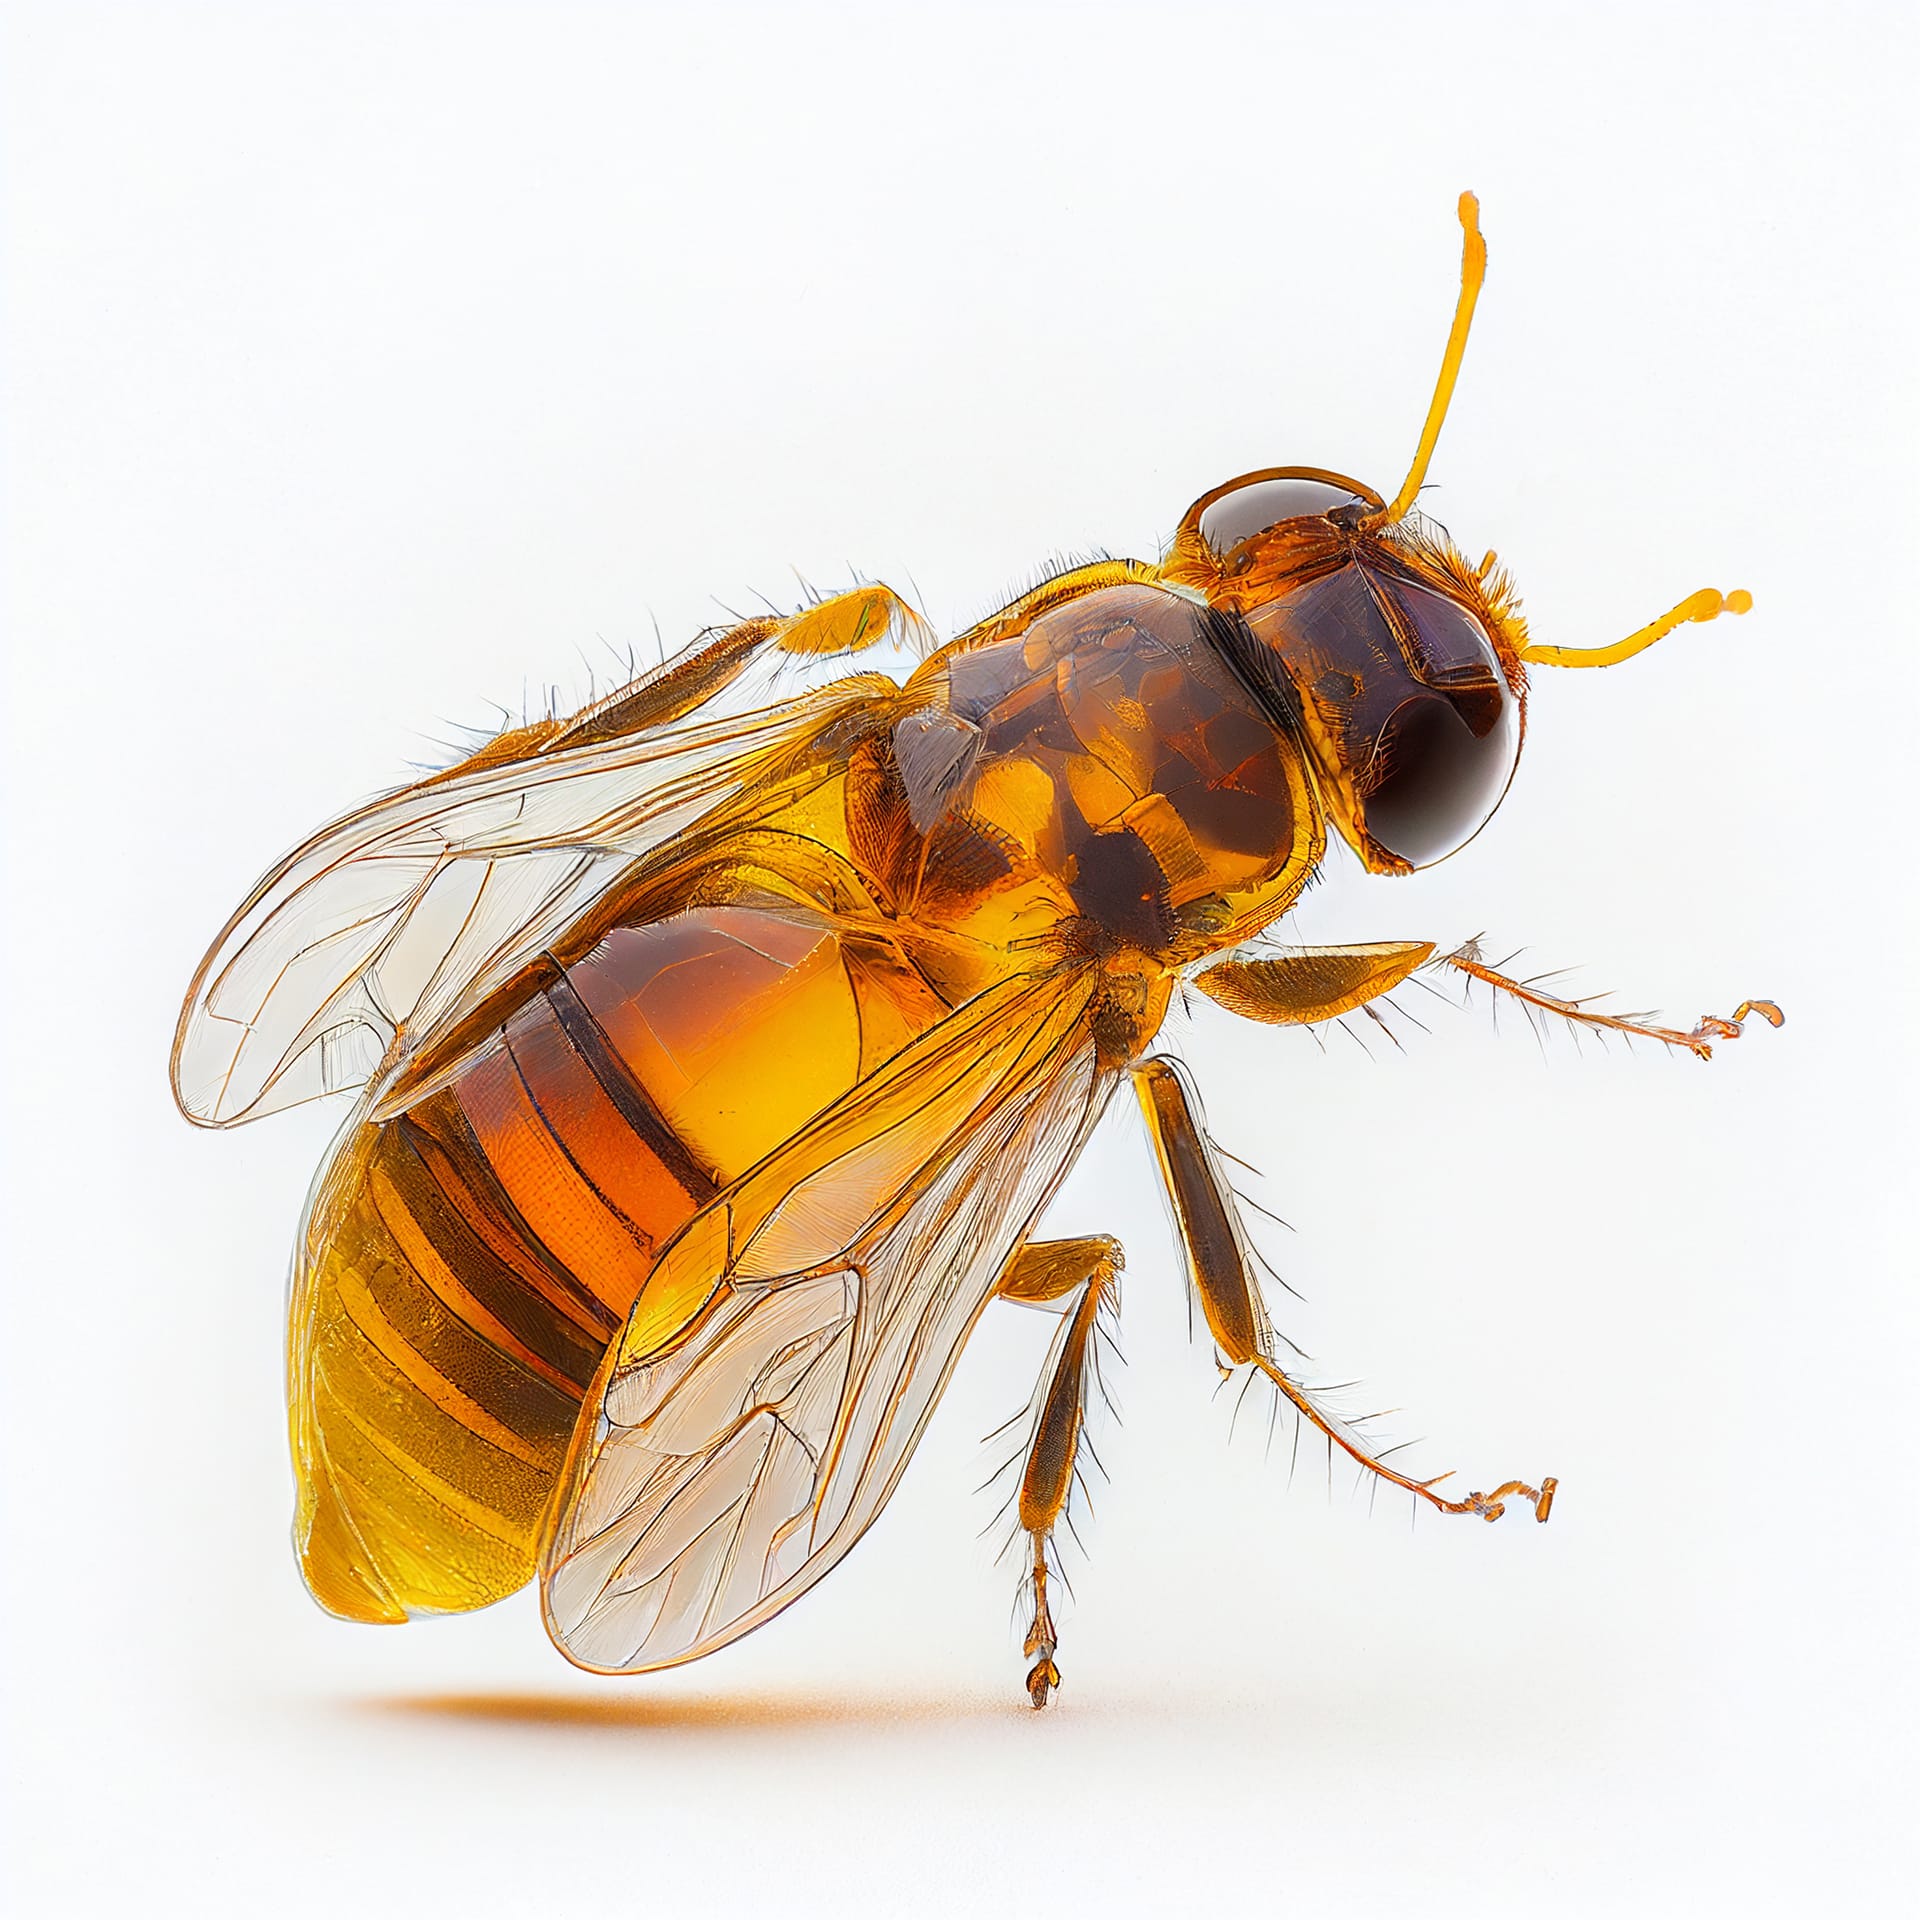 Sun stone bee glittering amber insect white background excellent image